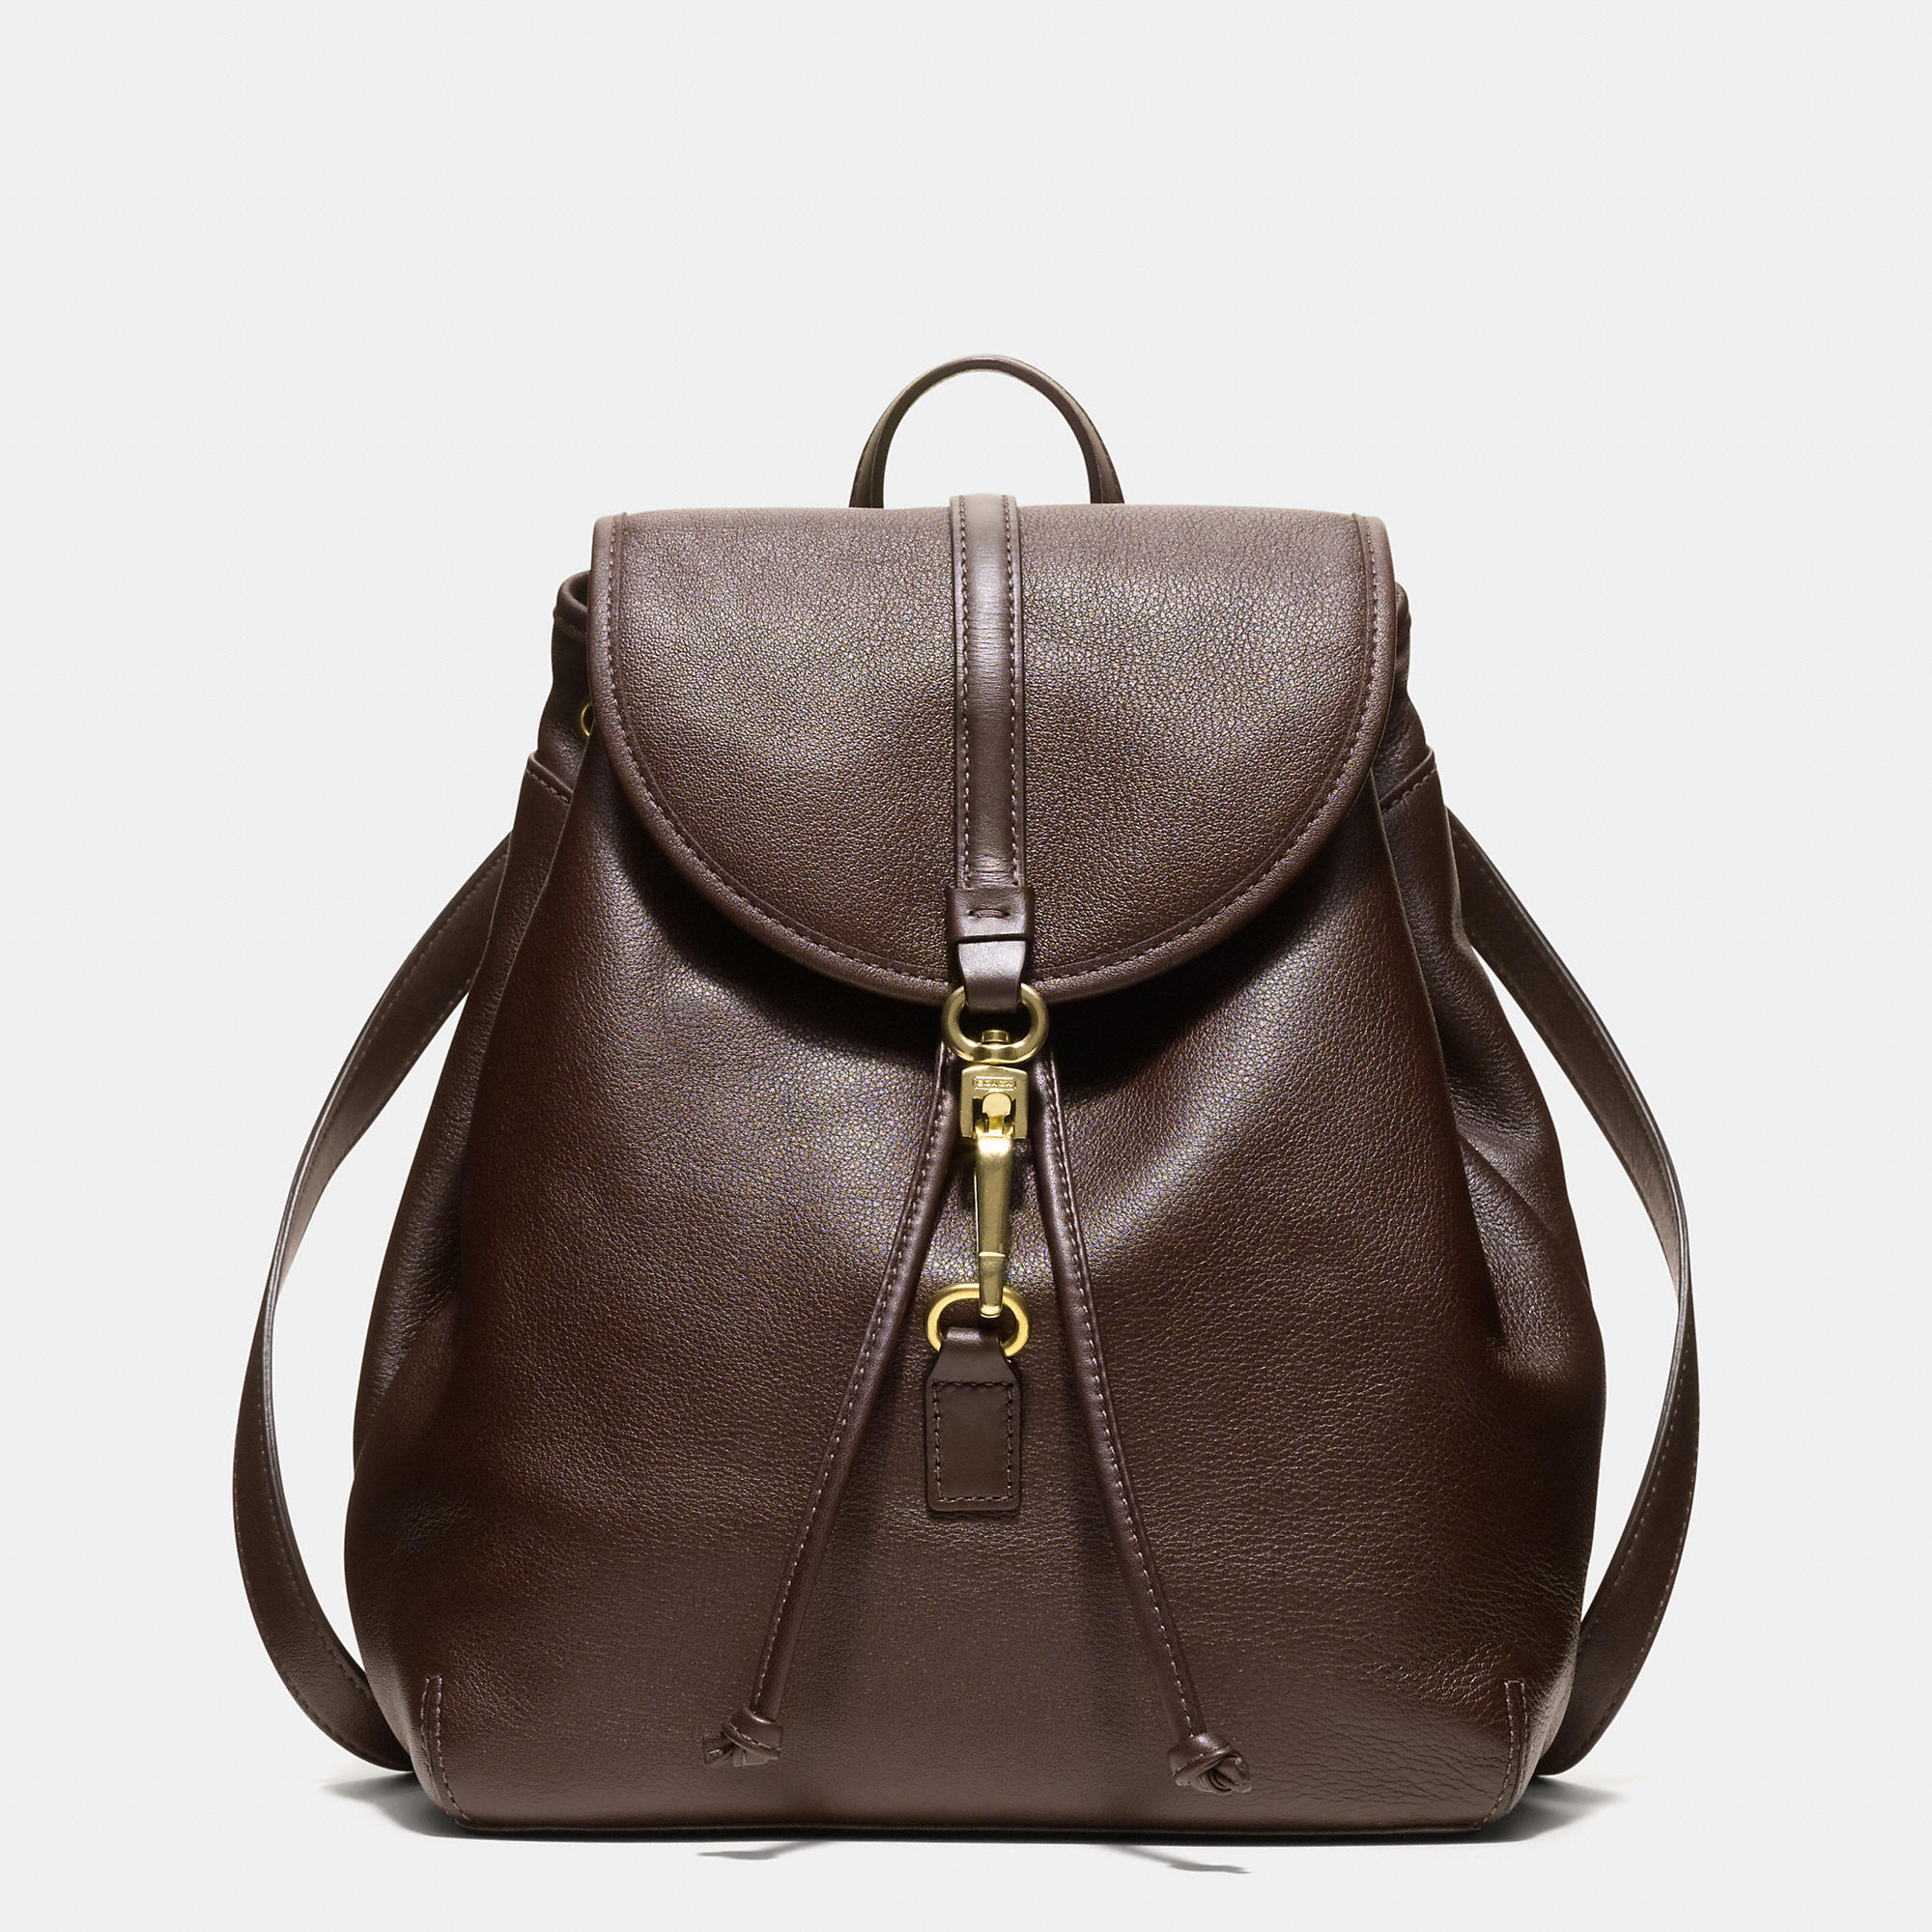 COACH Studio Legacy Backpack In Leather in Brass/Mahogany (Brown) - Lyst